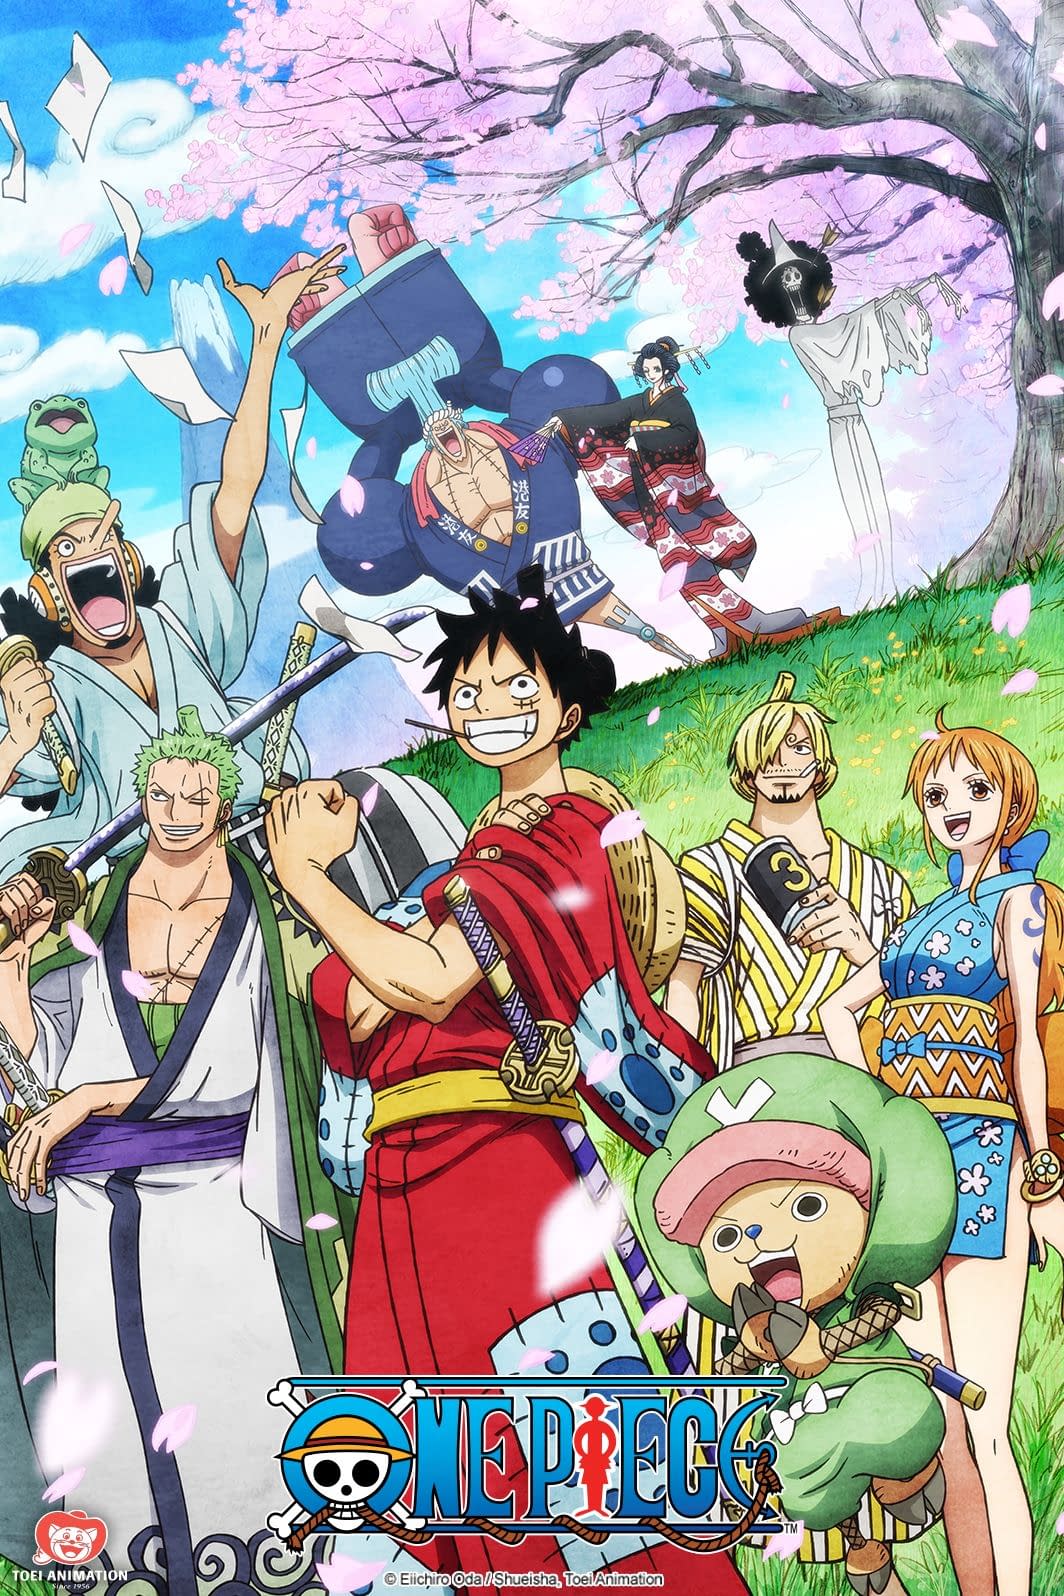 One Piece Episode 1,000 Debuts First Trailer